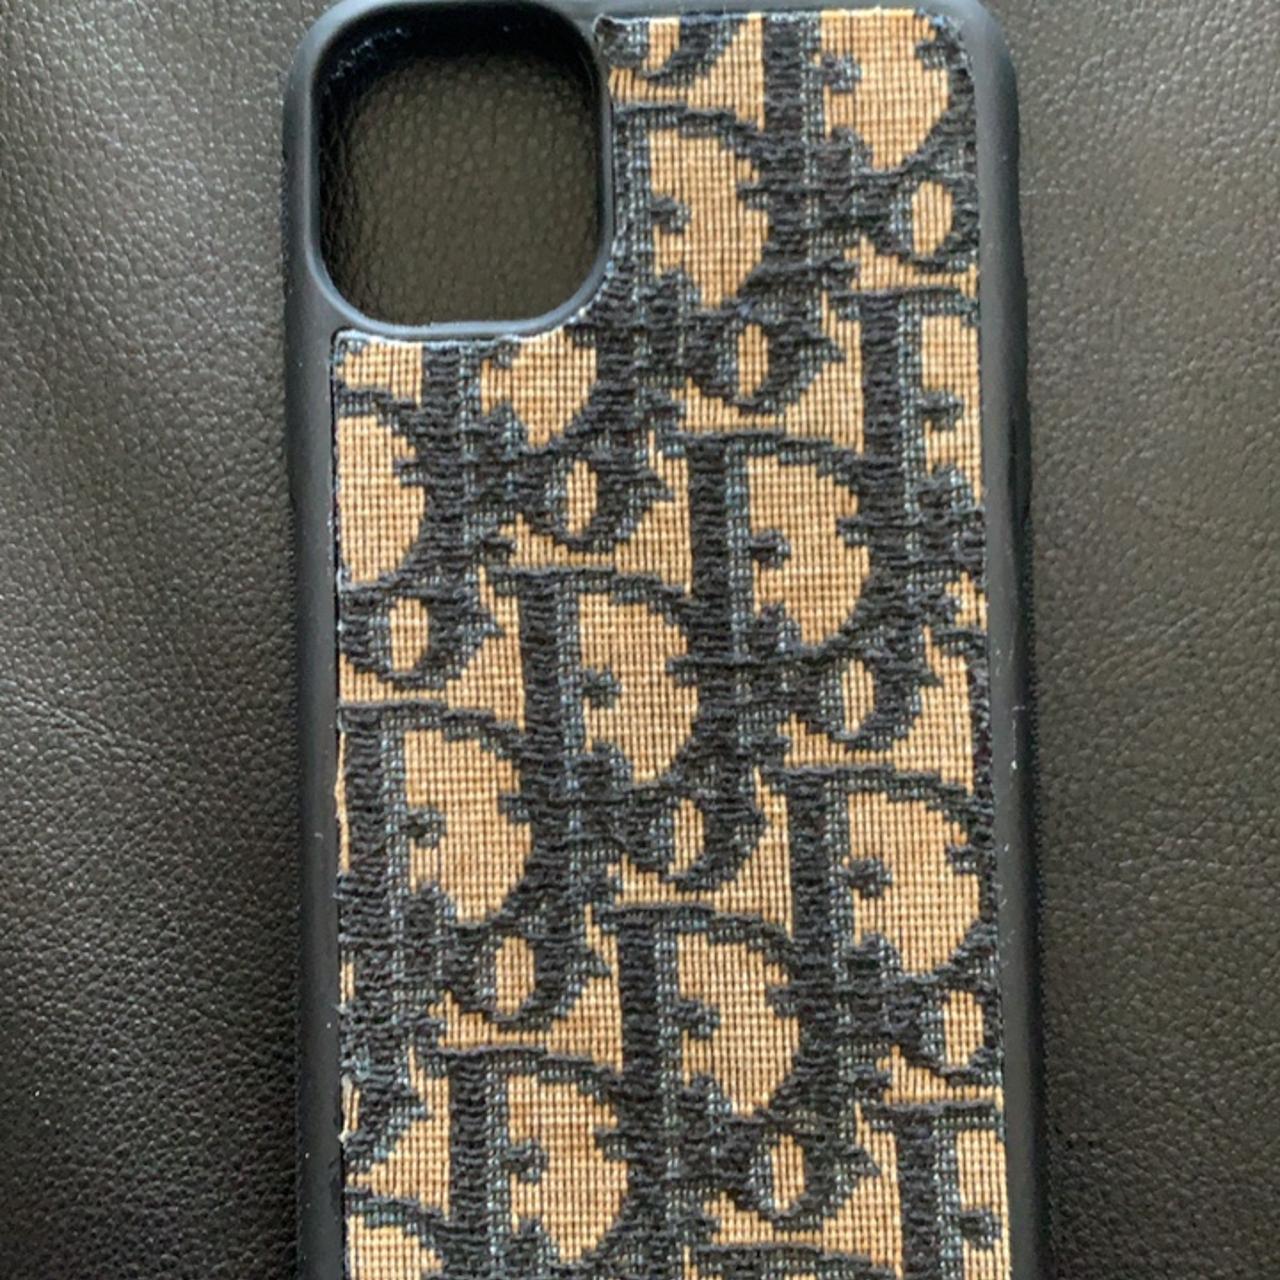 Selling this blue Louis Vuitton phone case💙 It's for - Depop